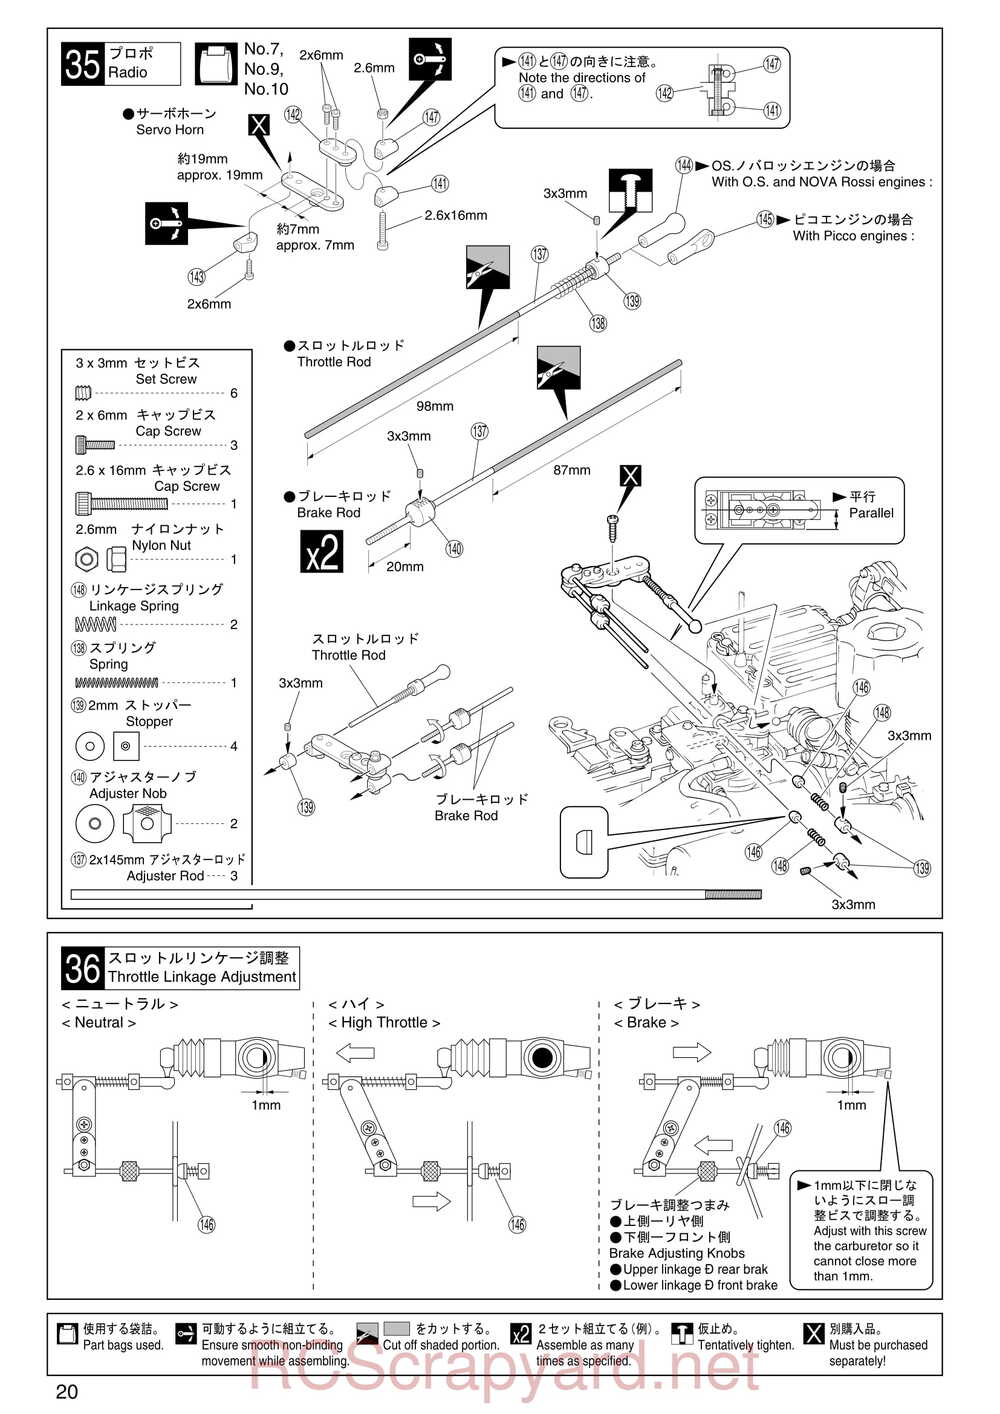 Kyosho - 31081- Inferno-MP-7-5 - Manual - Page 20